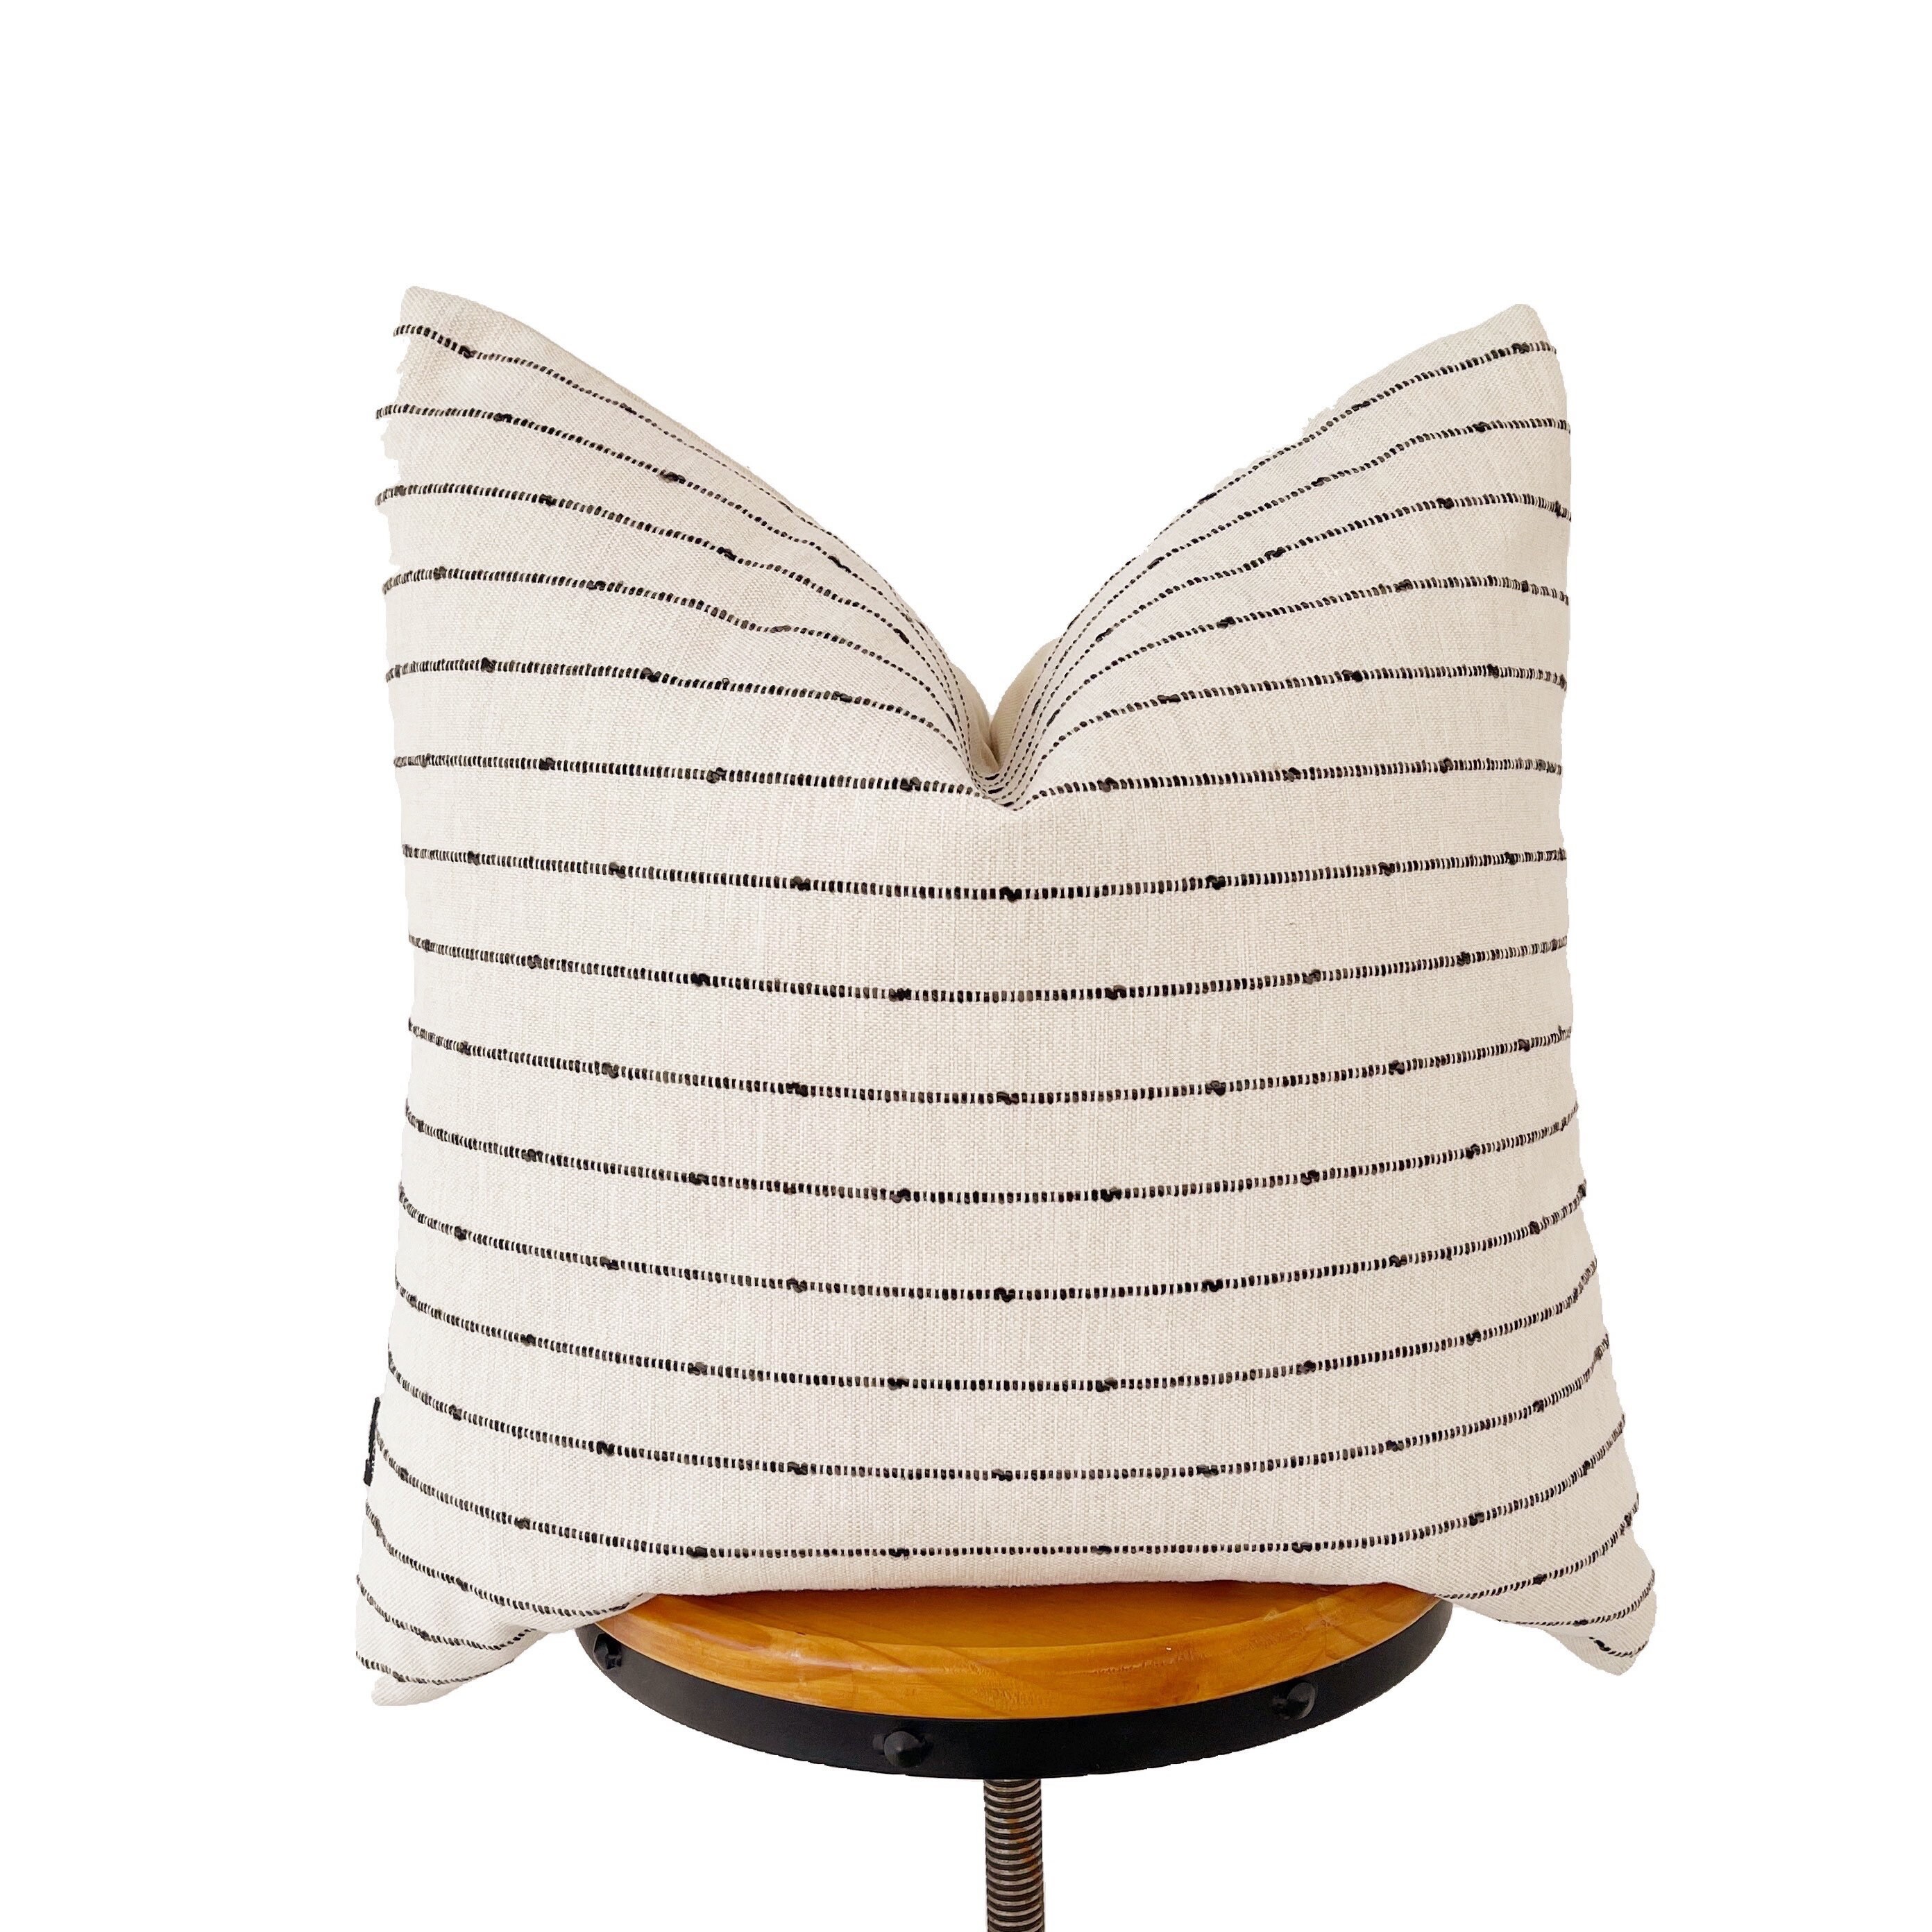 Azulina Medellin Lumbar Pillow Small - Black with Ivory Stripes - Black - Cover Only